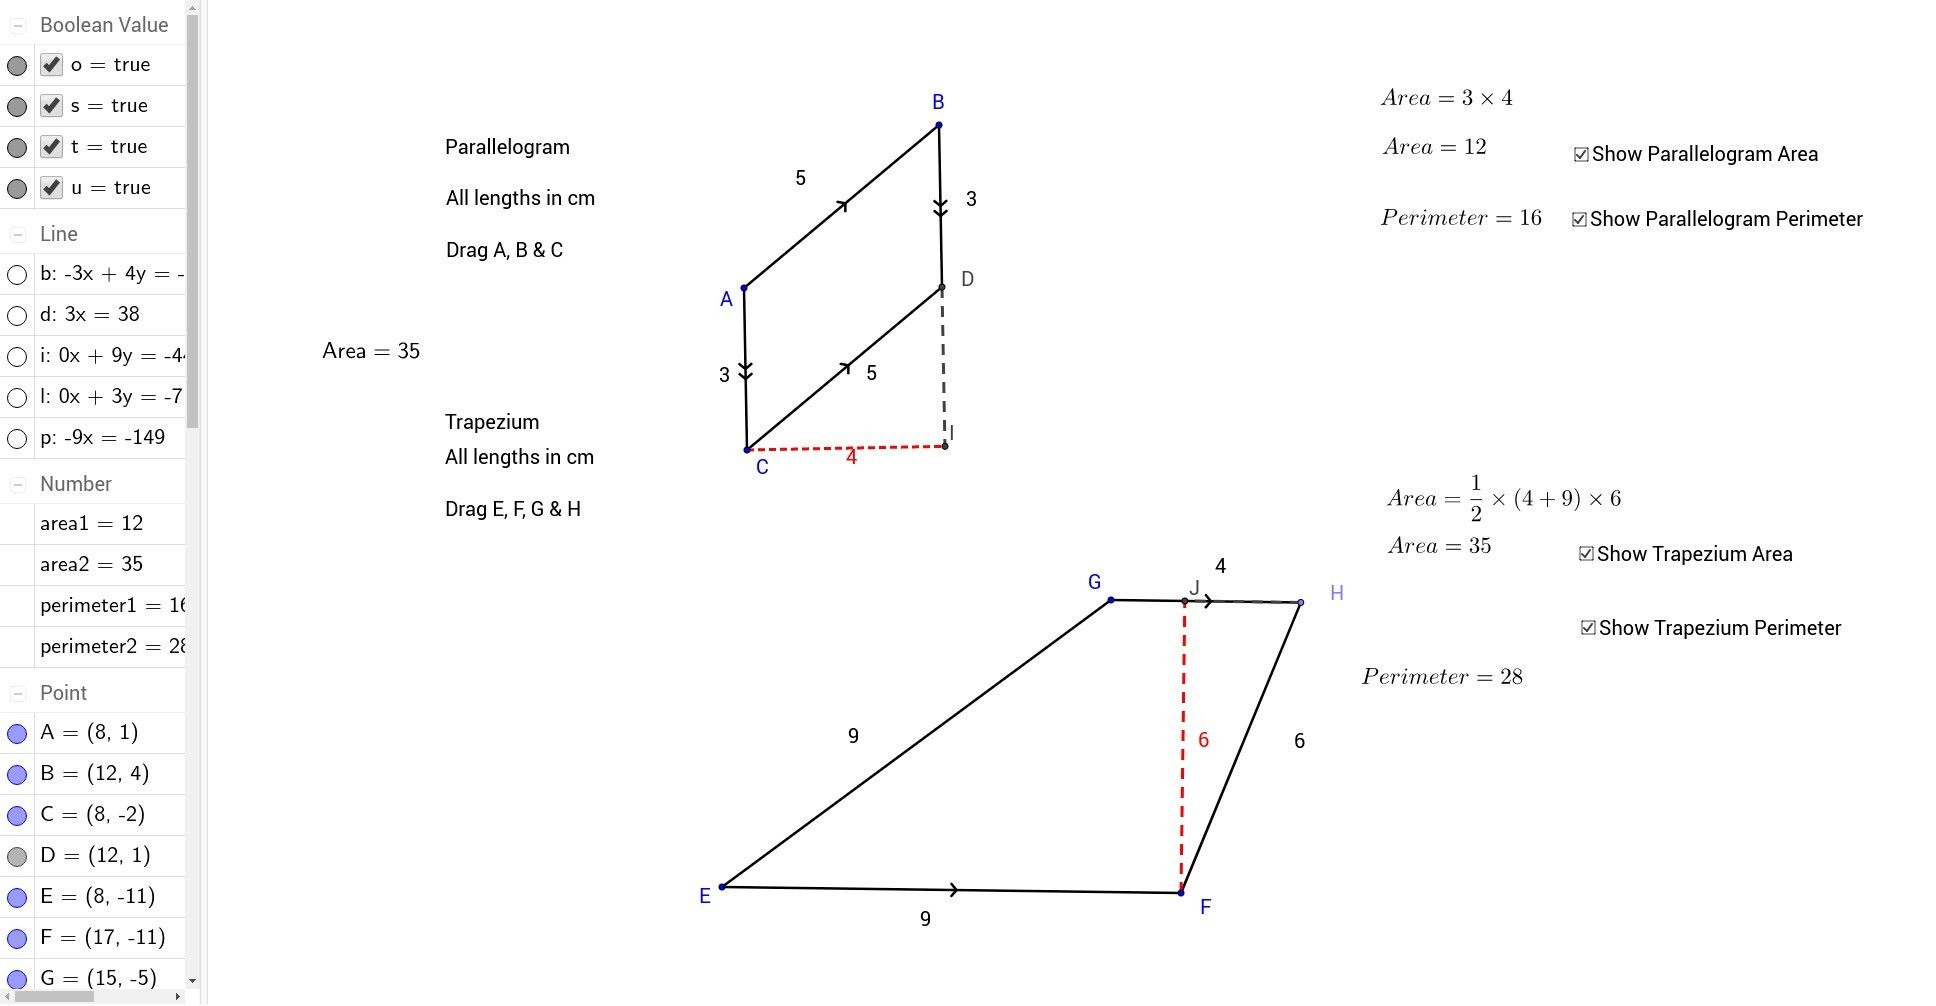 isosceles and equilateral triangles worksheet answers